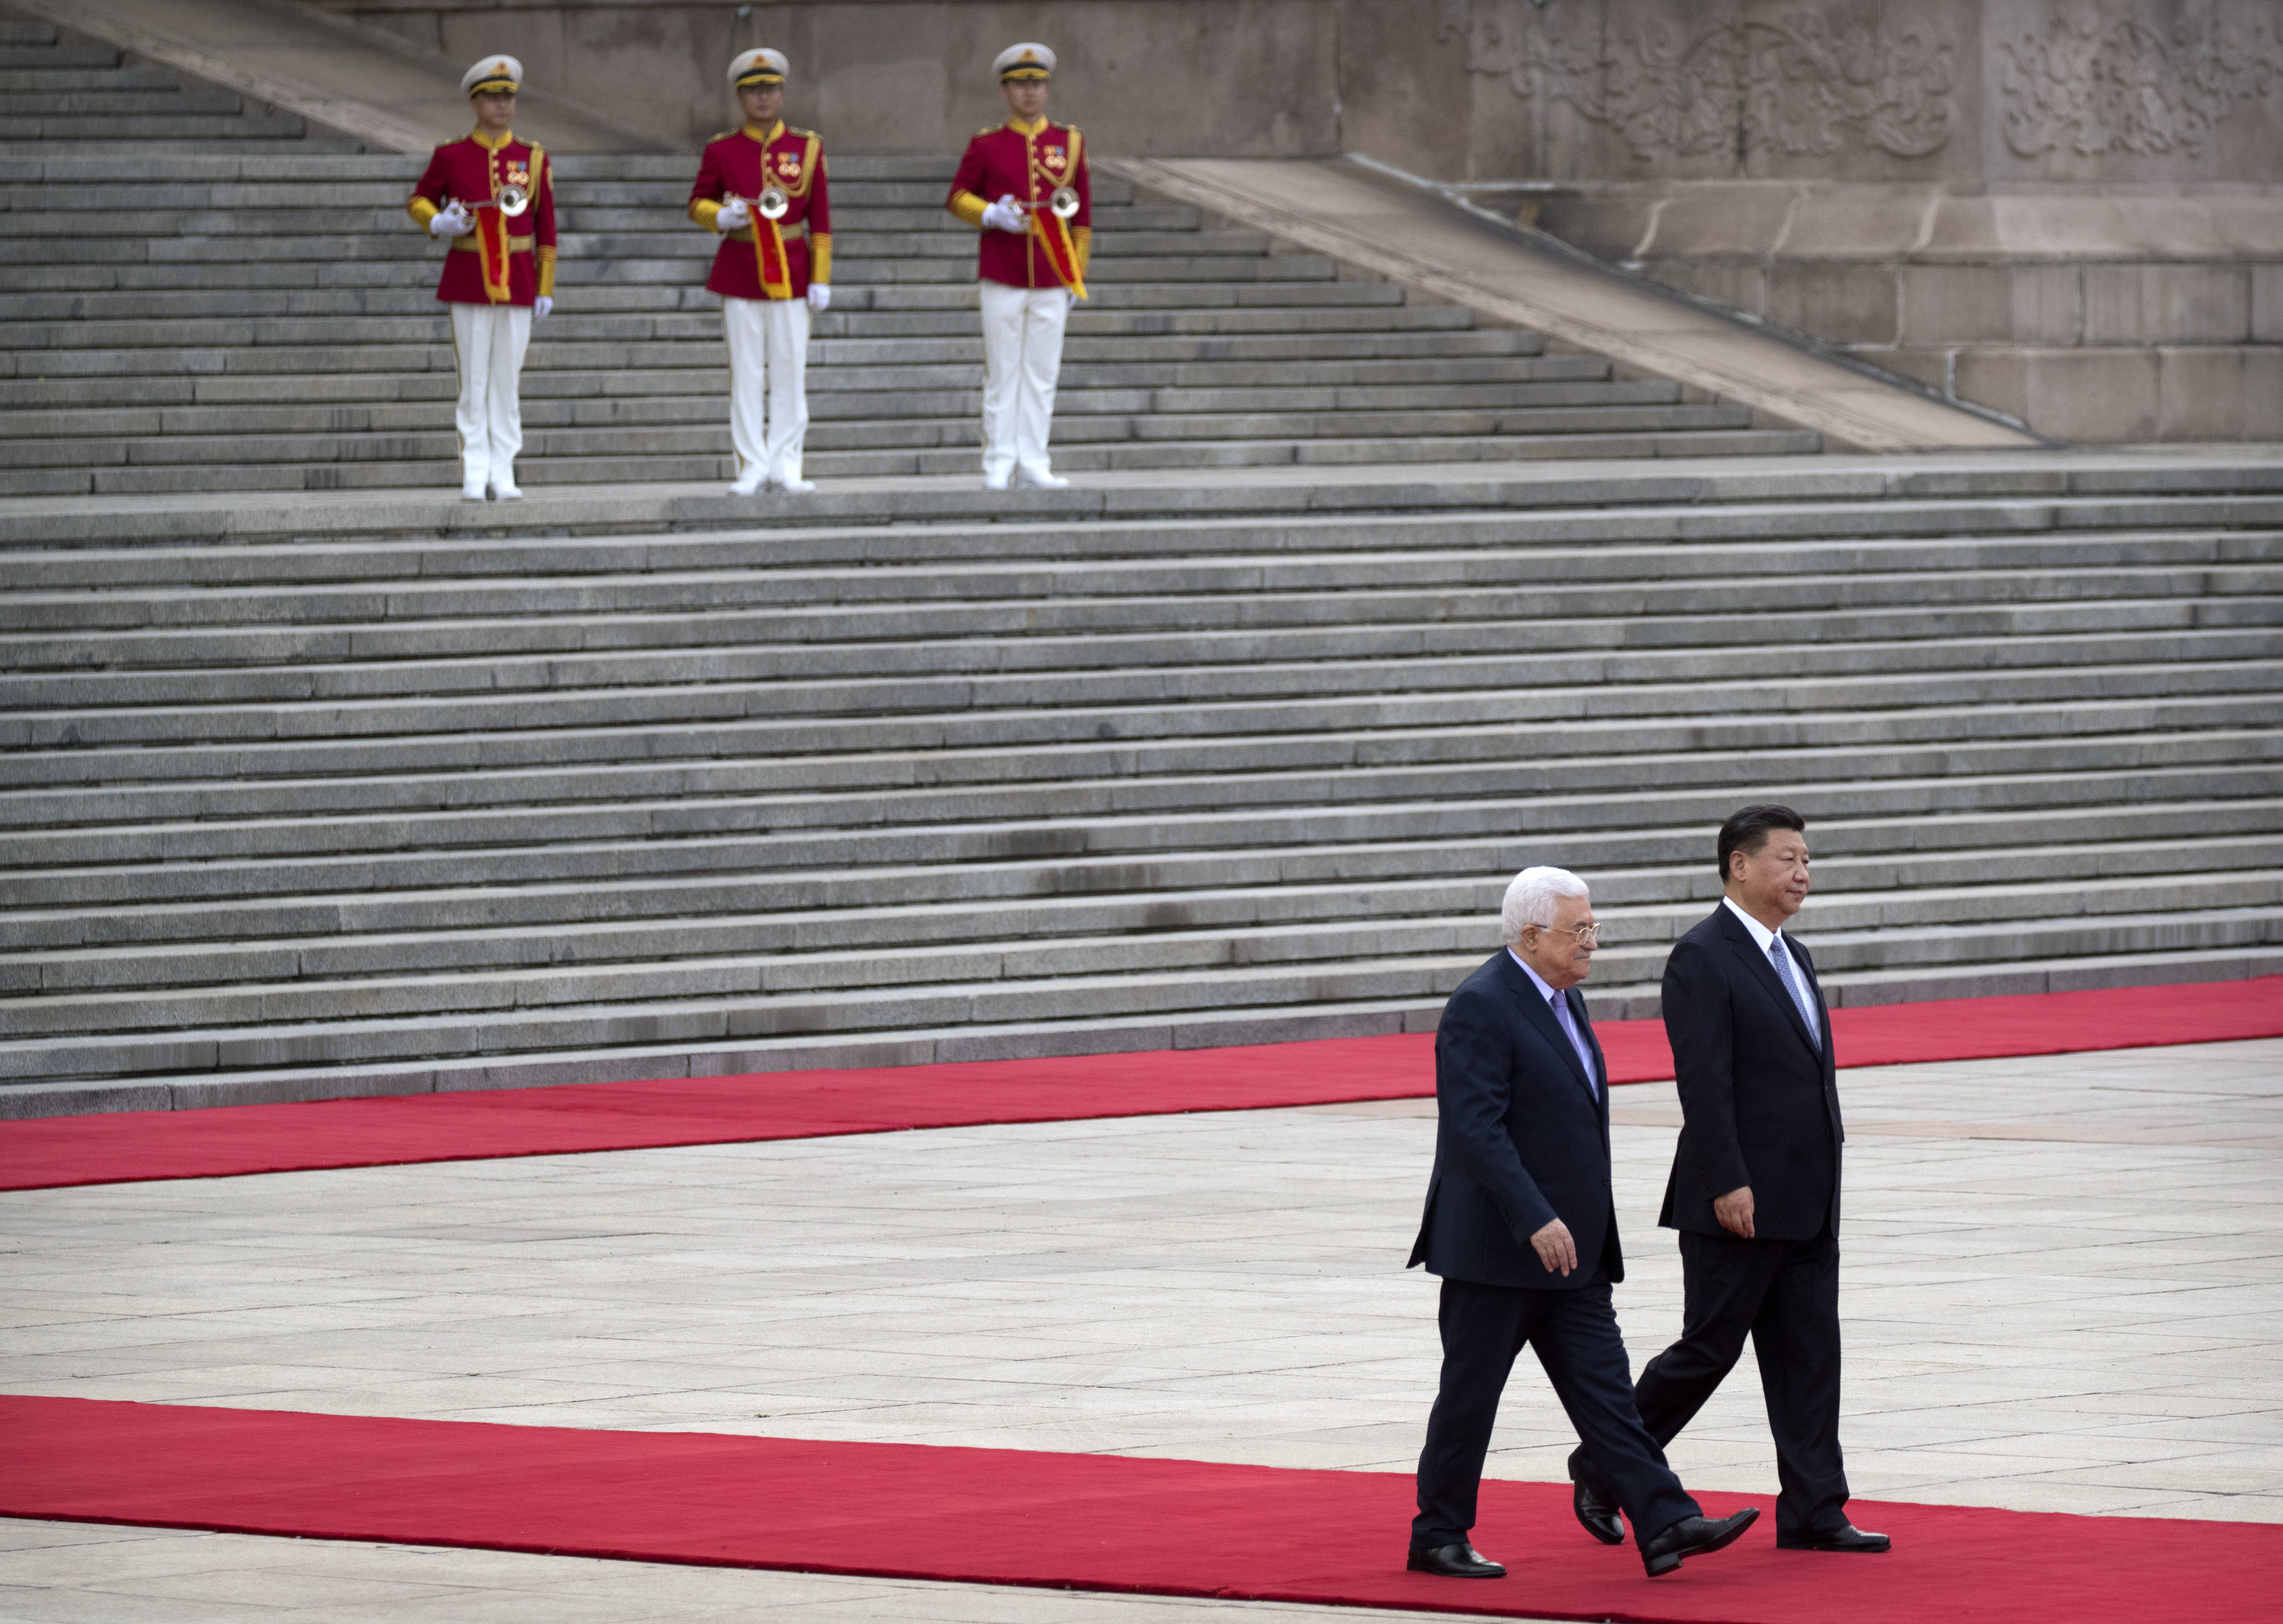 Palestinian President Mahmoud Abbas, left, and Chinese President Xi Jinping walk together during a welcome ceremony at the Great Hall of the People in Beijing, Tuesday, July 18, 2017. (AP Photo/Mark Schiefelbein)